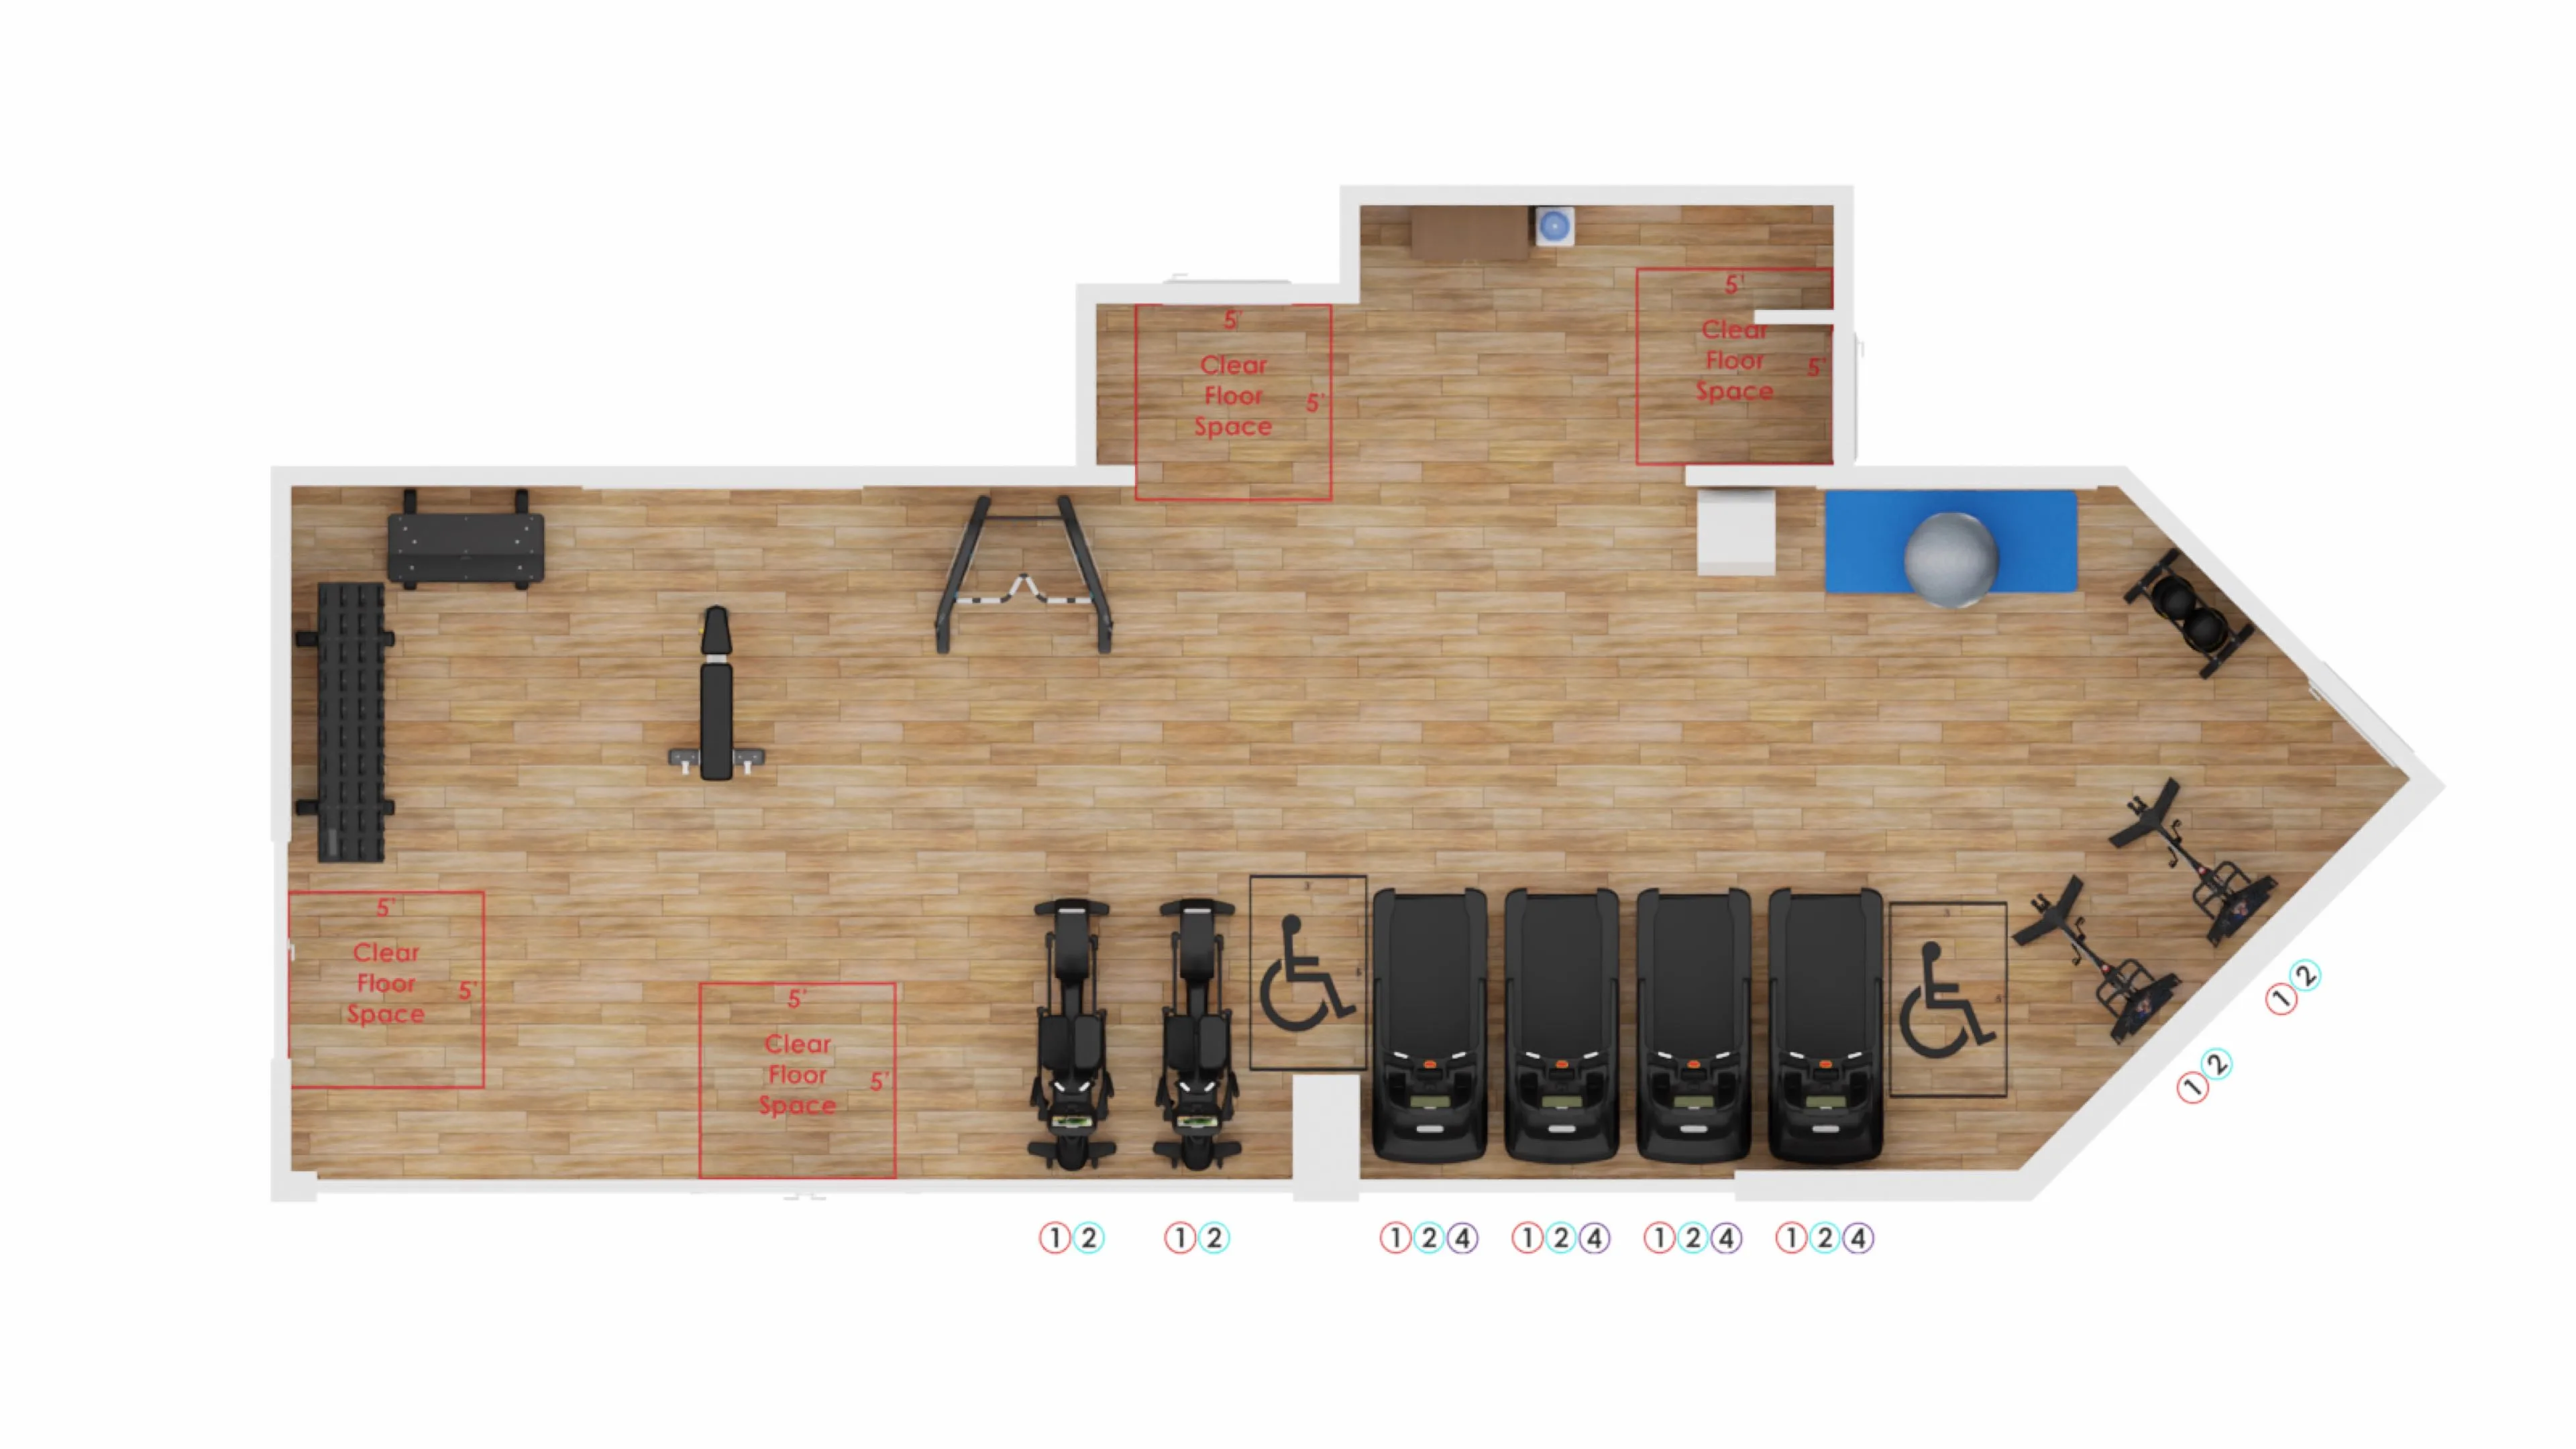 Commercial gym floor layout